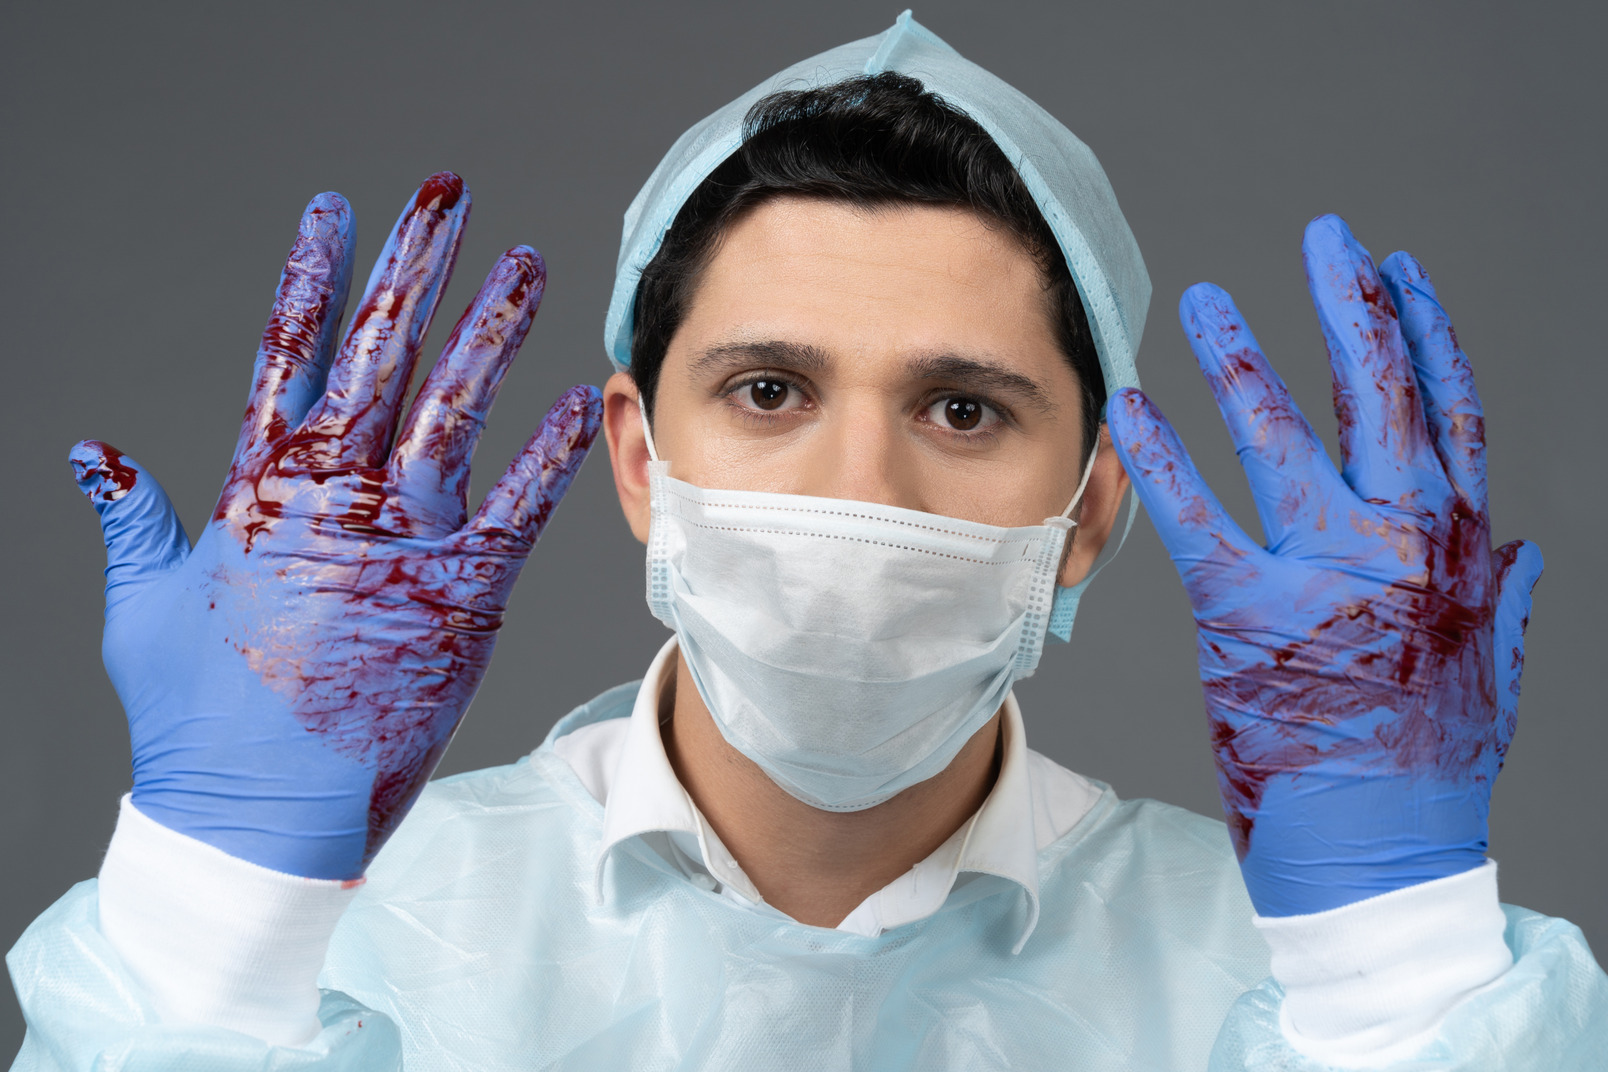 Doctor with gloves covered in blood